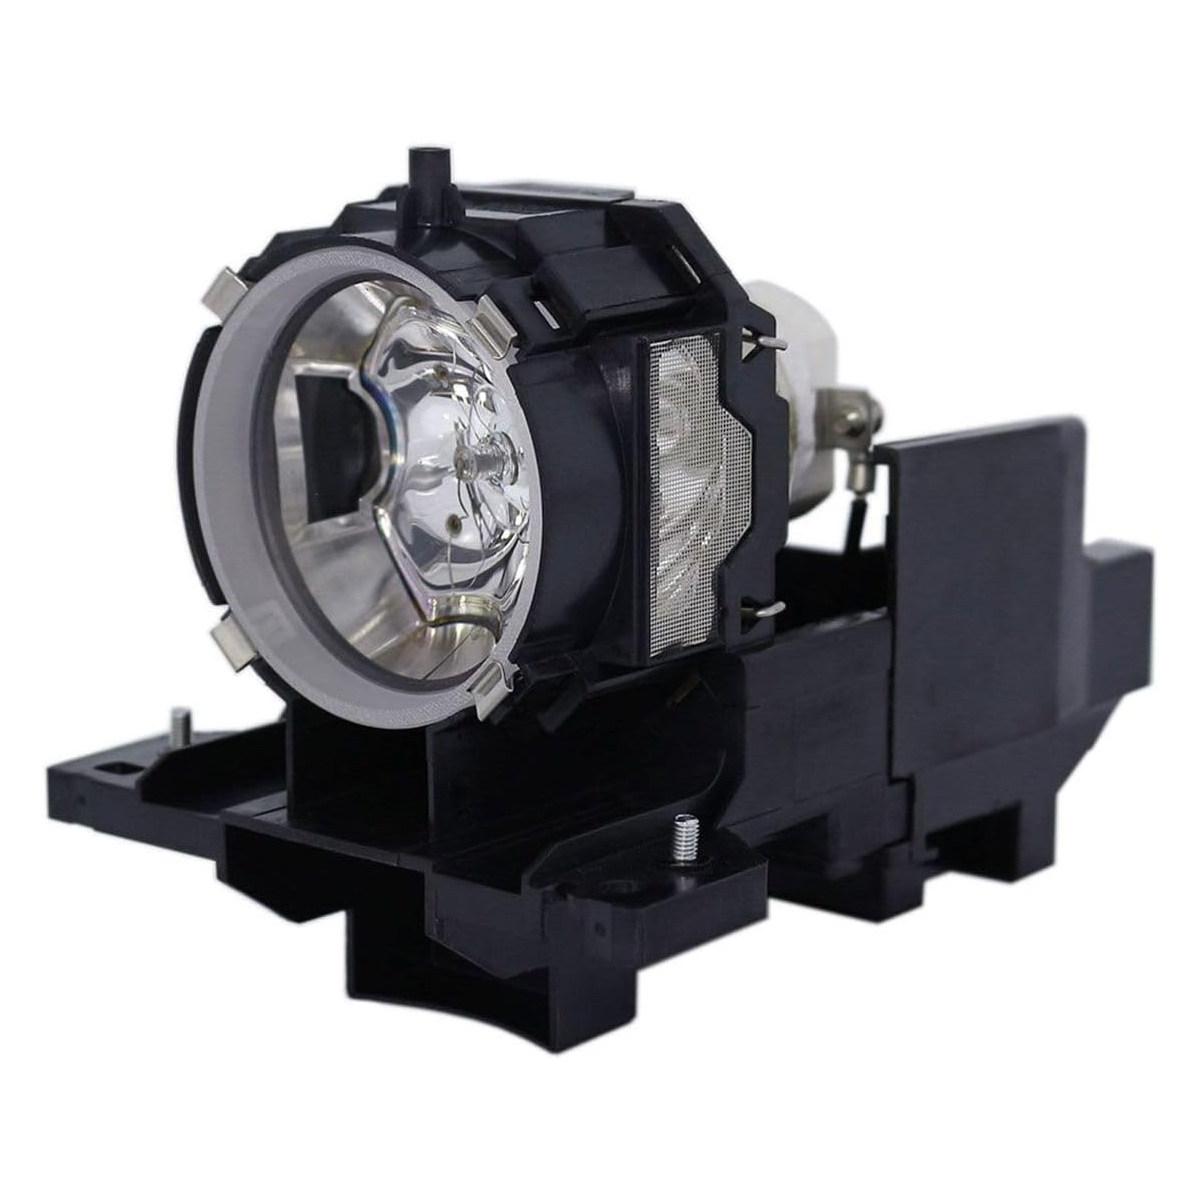 Replacement Projector lamp 78-6969-9930-5 For 3M X95